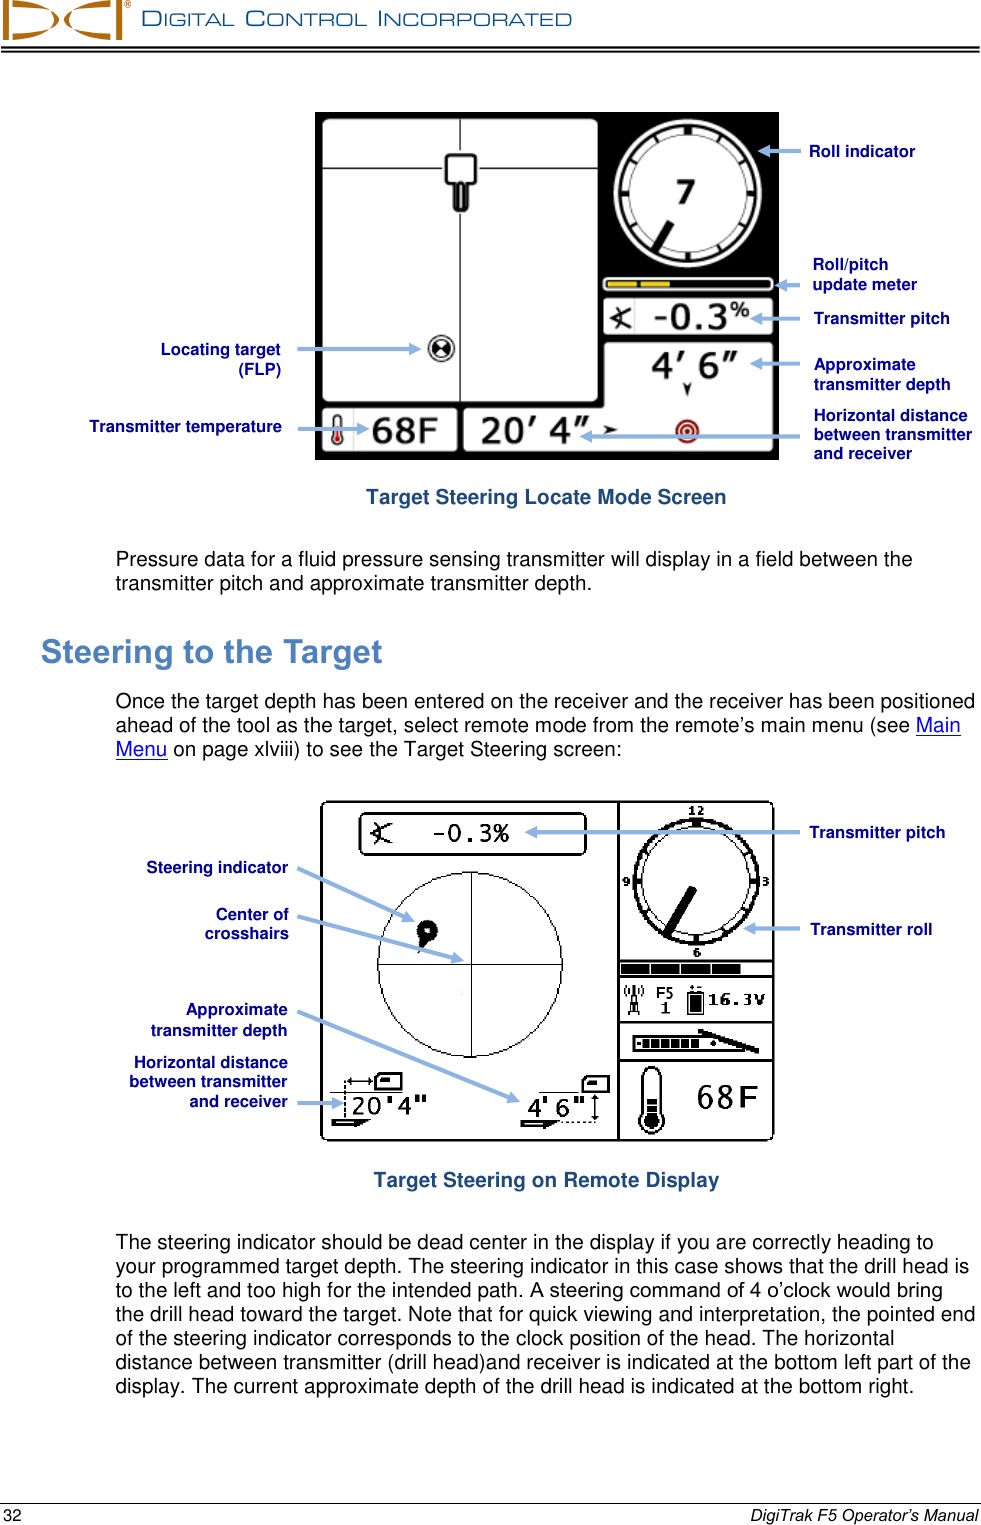   DIGITAL  CONTROL  INCORPORATED  32 DigiTrak F5 Operator’s Manual  Target Steering Locate Mode Screen Pressure data for a fluid pressure sensing transmitter will display in a field between the transmitter pitch and approximate transmitter depth. Steering to the Target Once the target depth has been entered on the receiver and the receiver has been positioned ahead of the tool as the target, select remote mode from the remote’s main menu (see Main Menu on page xlviii) to see the Target Steering screen:  Target Steering on Remote Display The steering indicator should be dead center in the display if you are correctly heading to your programmed target depth. The steering indicator in this case shows that the drill head is to the left and too high for the intended path. A steering command of 4 o’clock would bring the drill head toward the target. Note that for quick viewing and interpretation, the pointed end of the steering indicator corresponds to the clock position of the head. The horizontal distance between transmitter (drill head)and receiver is indicated at the bottom left part of the display. The current approximate depth of the drill head is indicated at the bottom right. Horizontal distance between transmitter and receiver Approximate transmitter depth Transmitter roll Transmitter pitch Transmitter temperature Approximate transmitter depth Transmitter pitch Locating target (FLP) Roll/pitch update meter Roll indicator Steering indicator Center of  crosshairs Horizontal distance between transmitter and receiver  